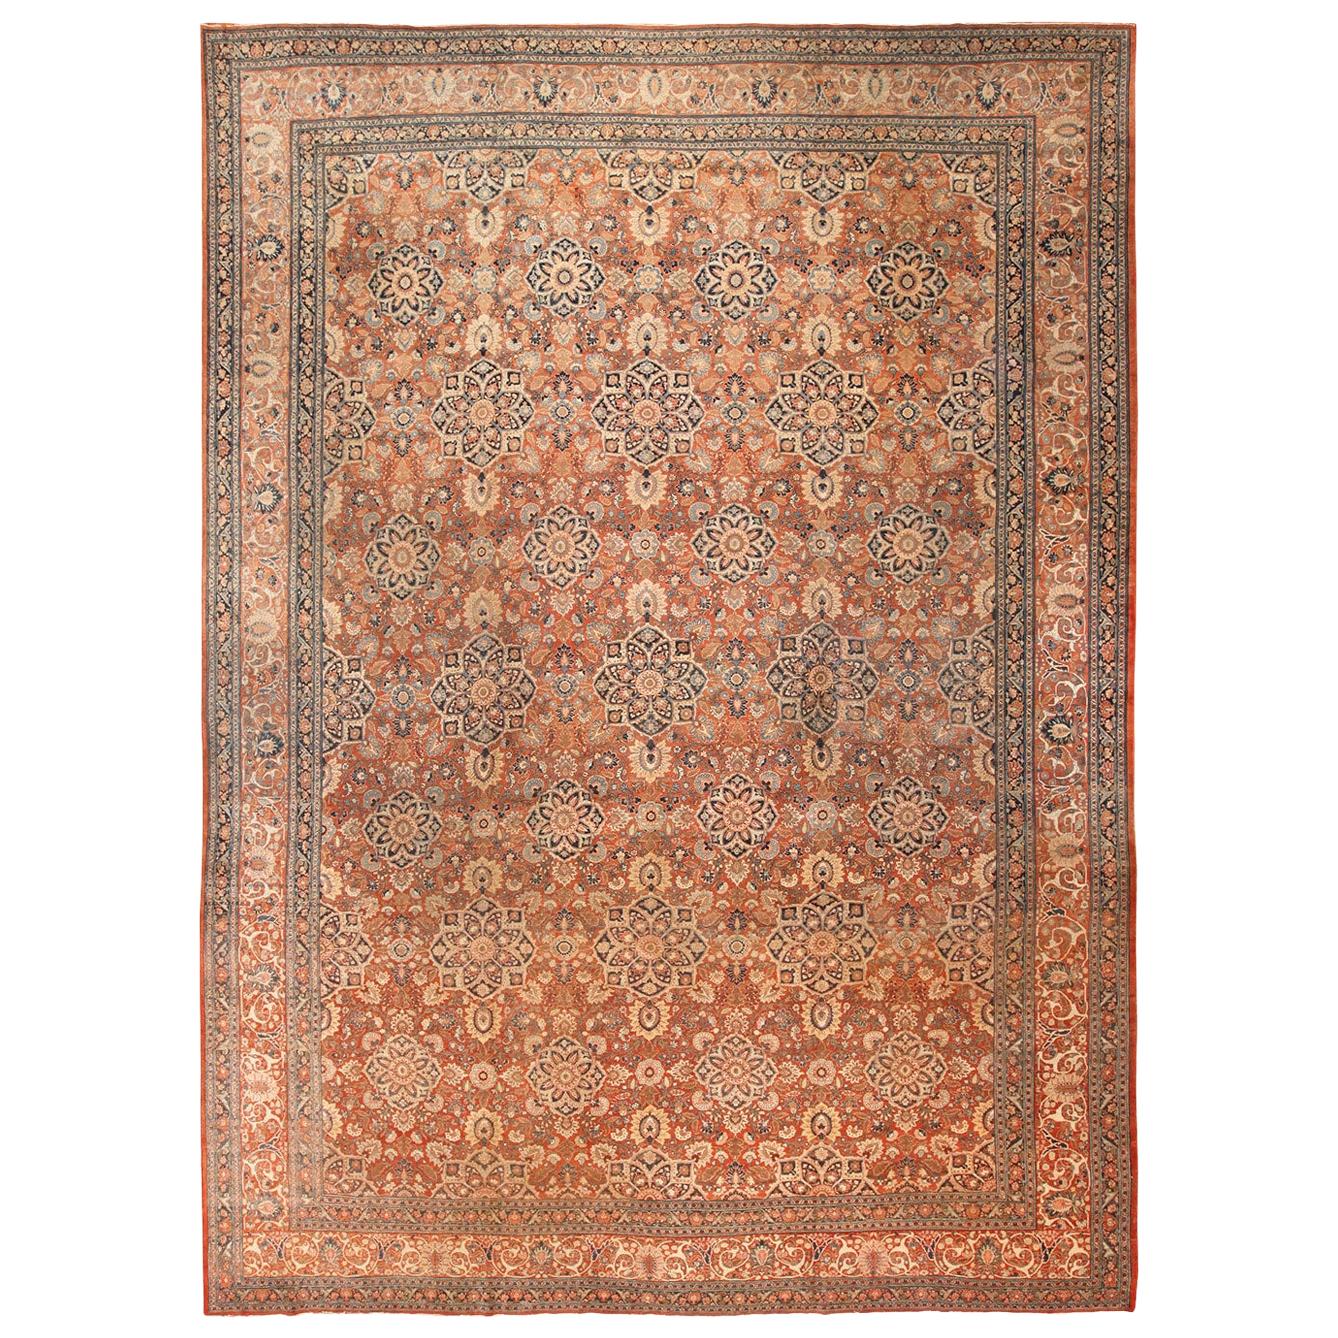 Antique All Over Design Persian Tabriz Rug. 12 ft 6 in x 17 ft 10 in  For Sale